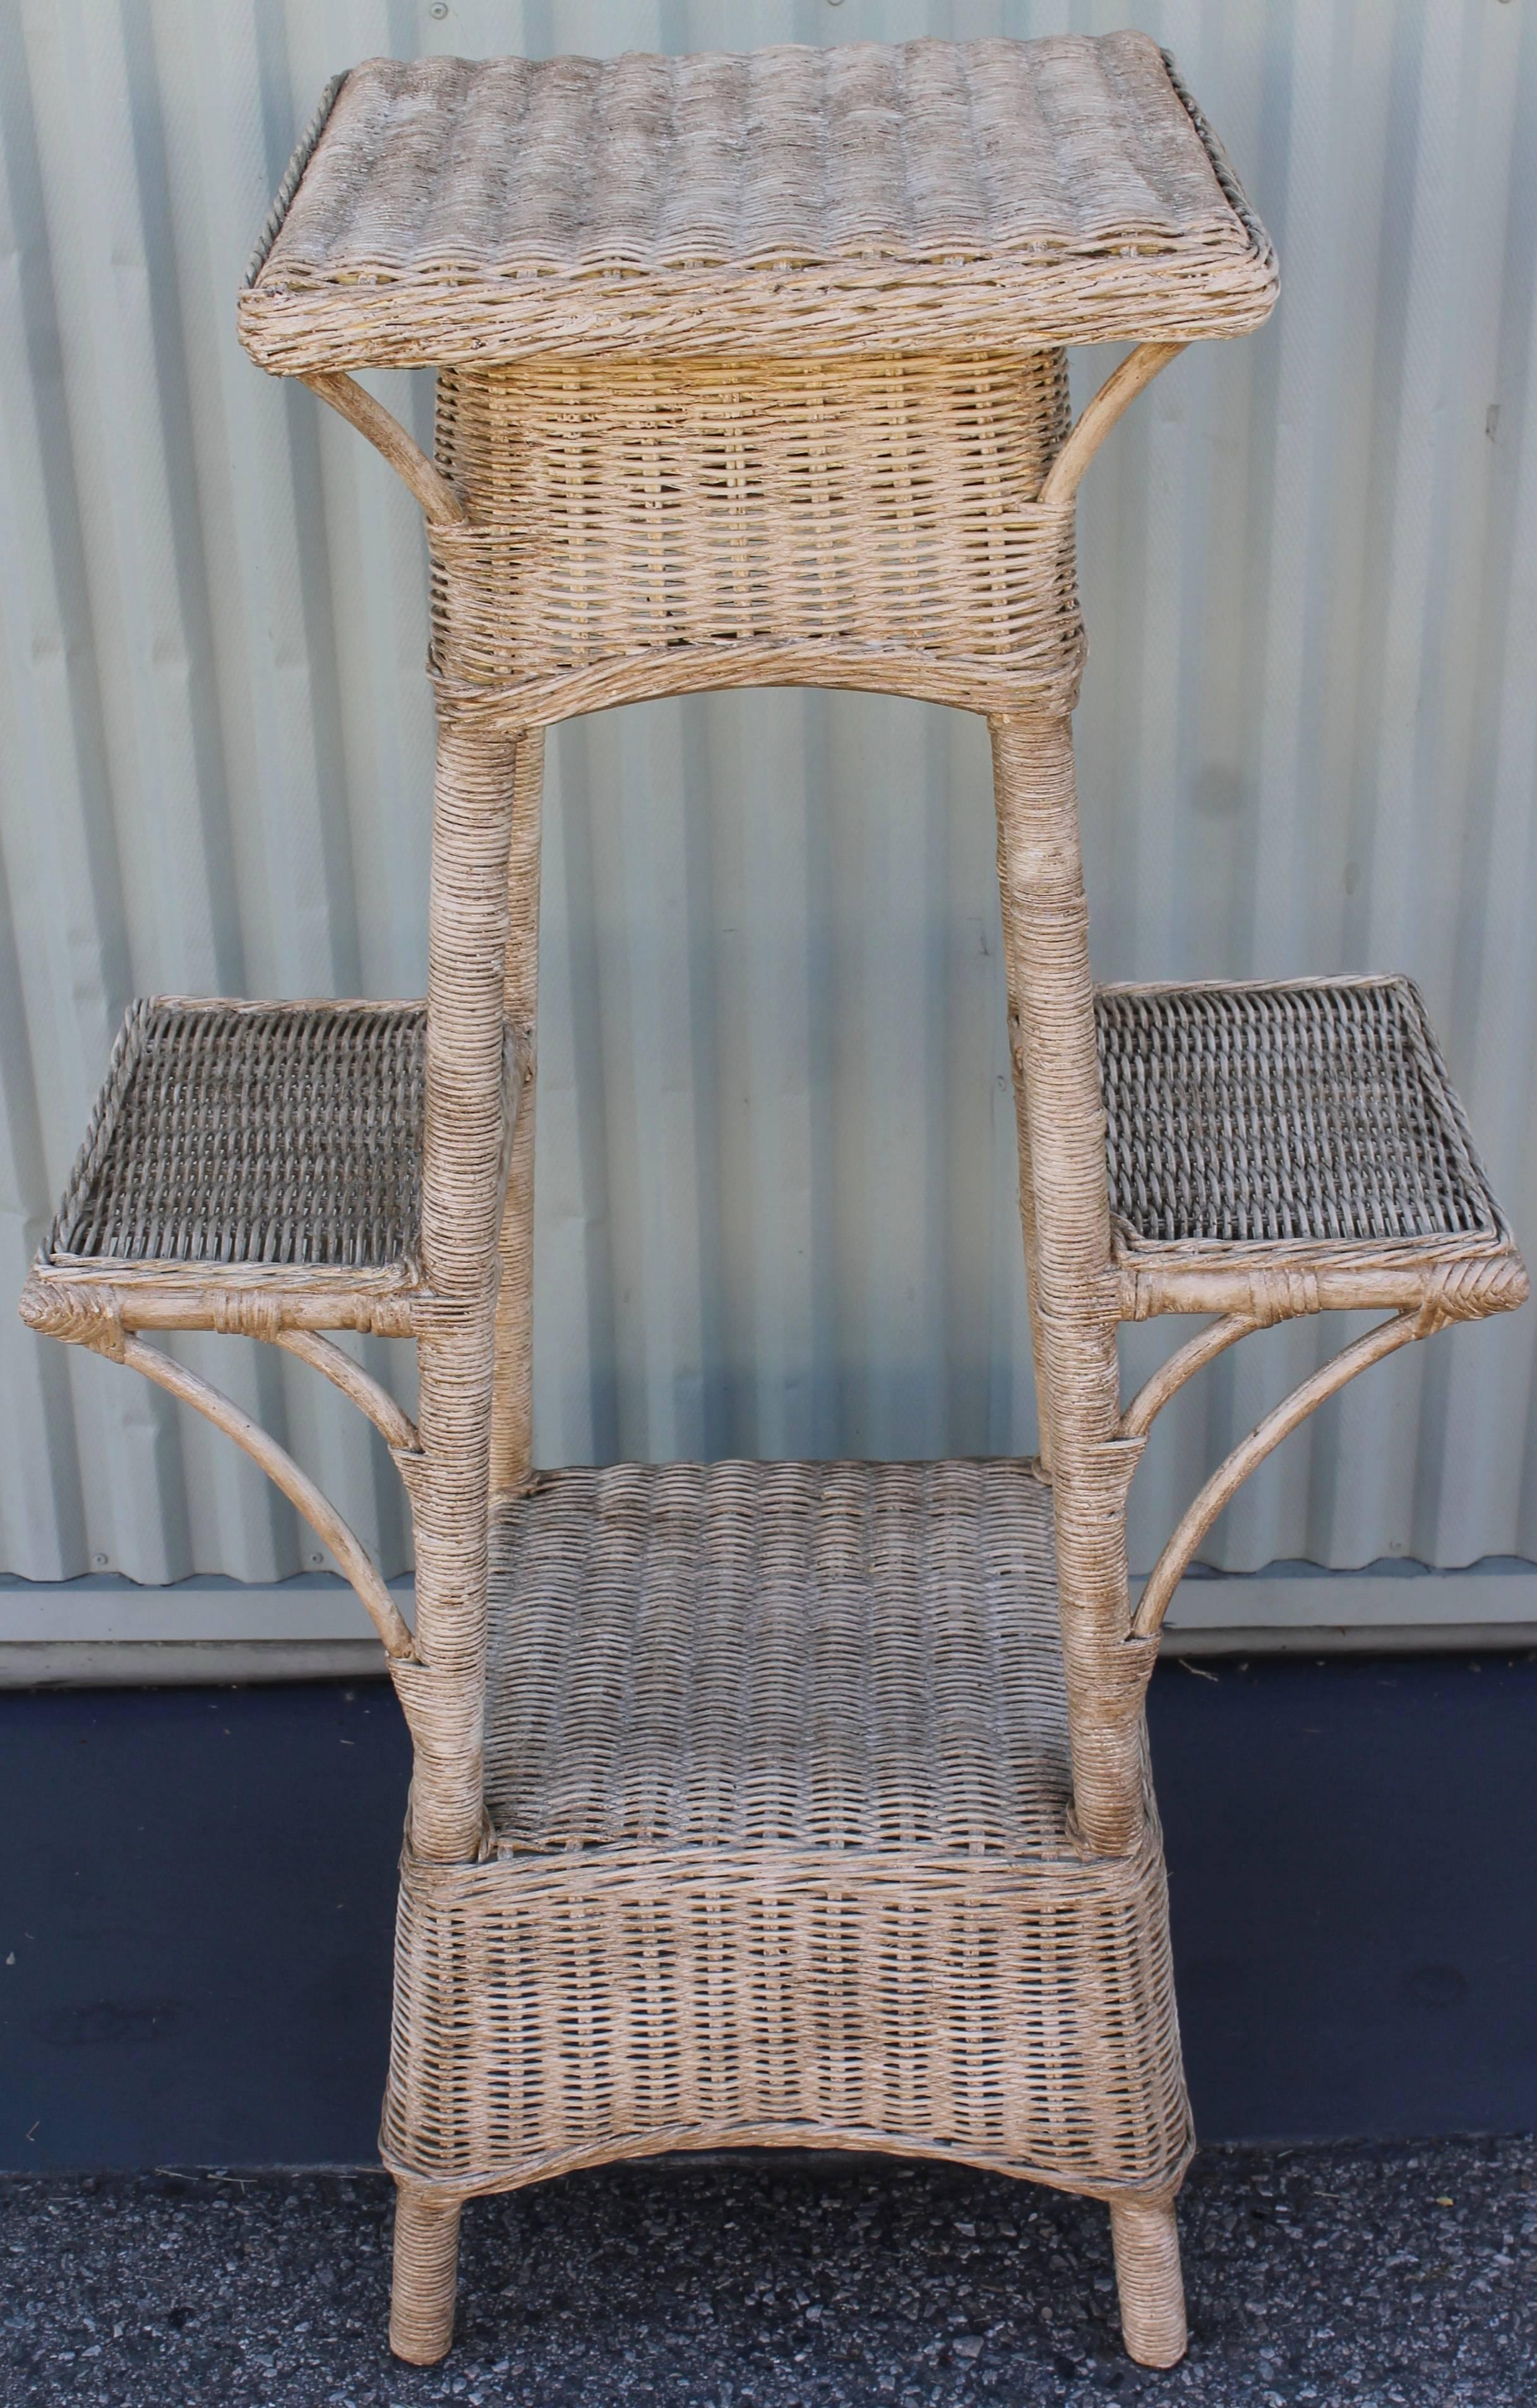 Original painted wicker plant stand from New England. The condition is very good and sturdy.